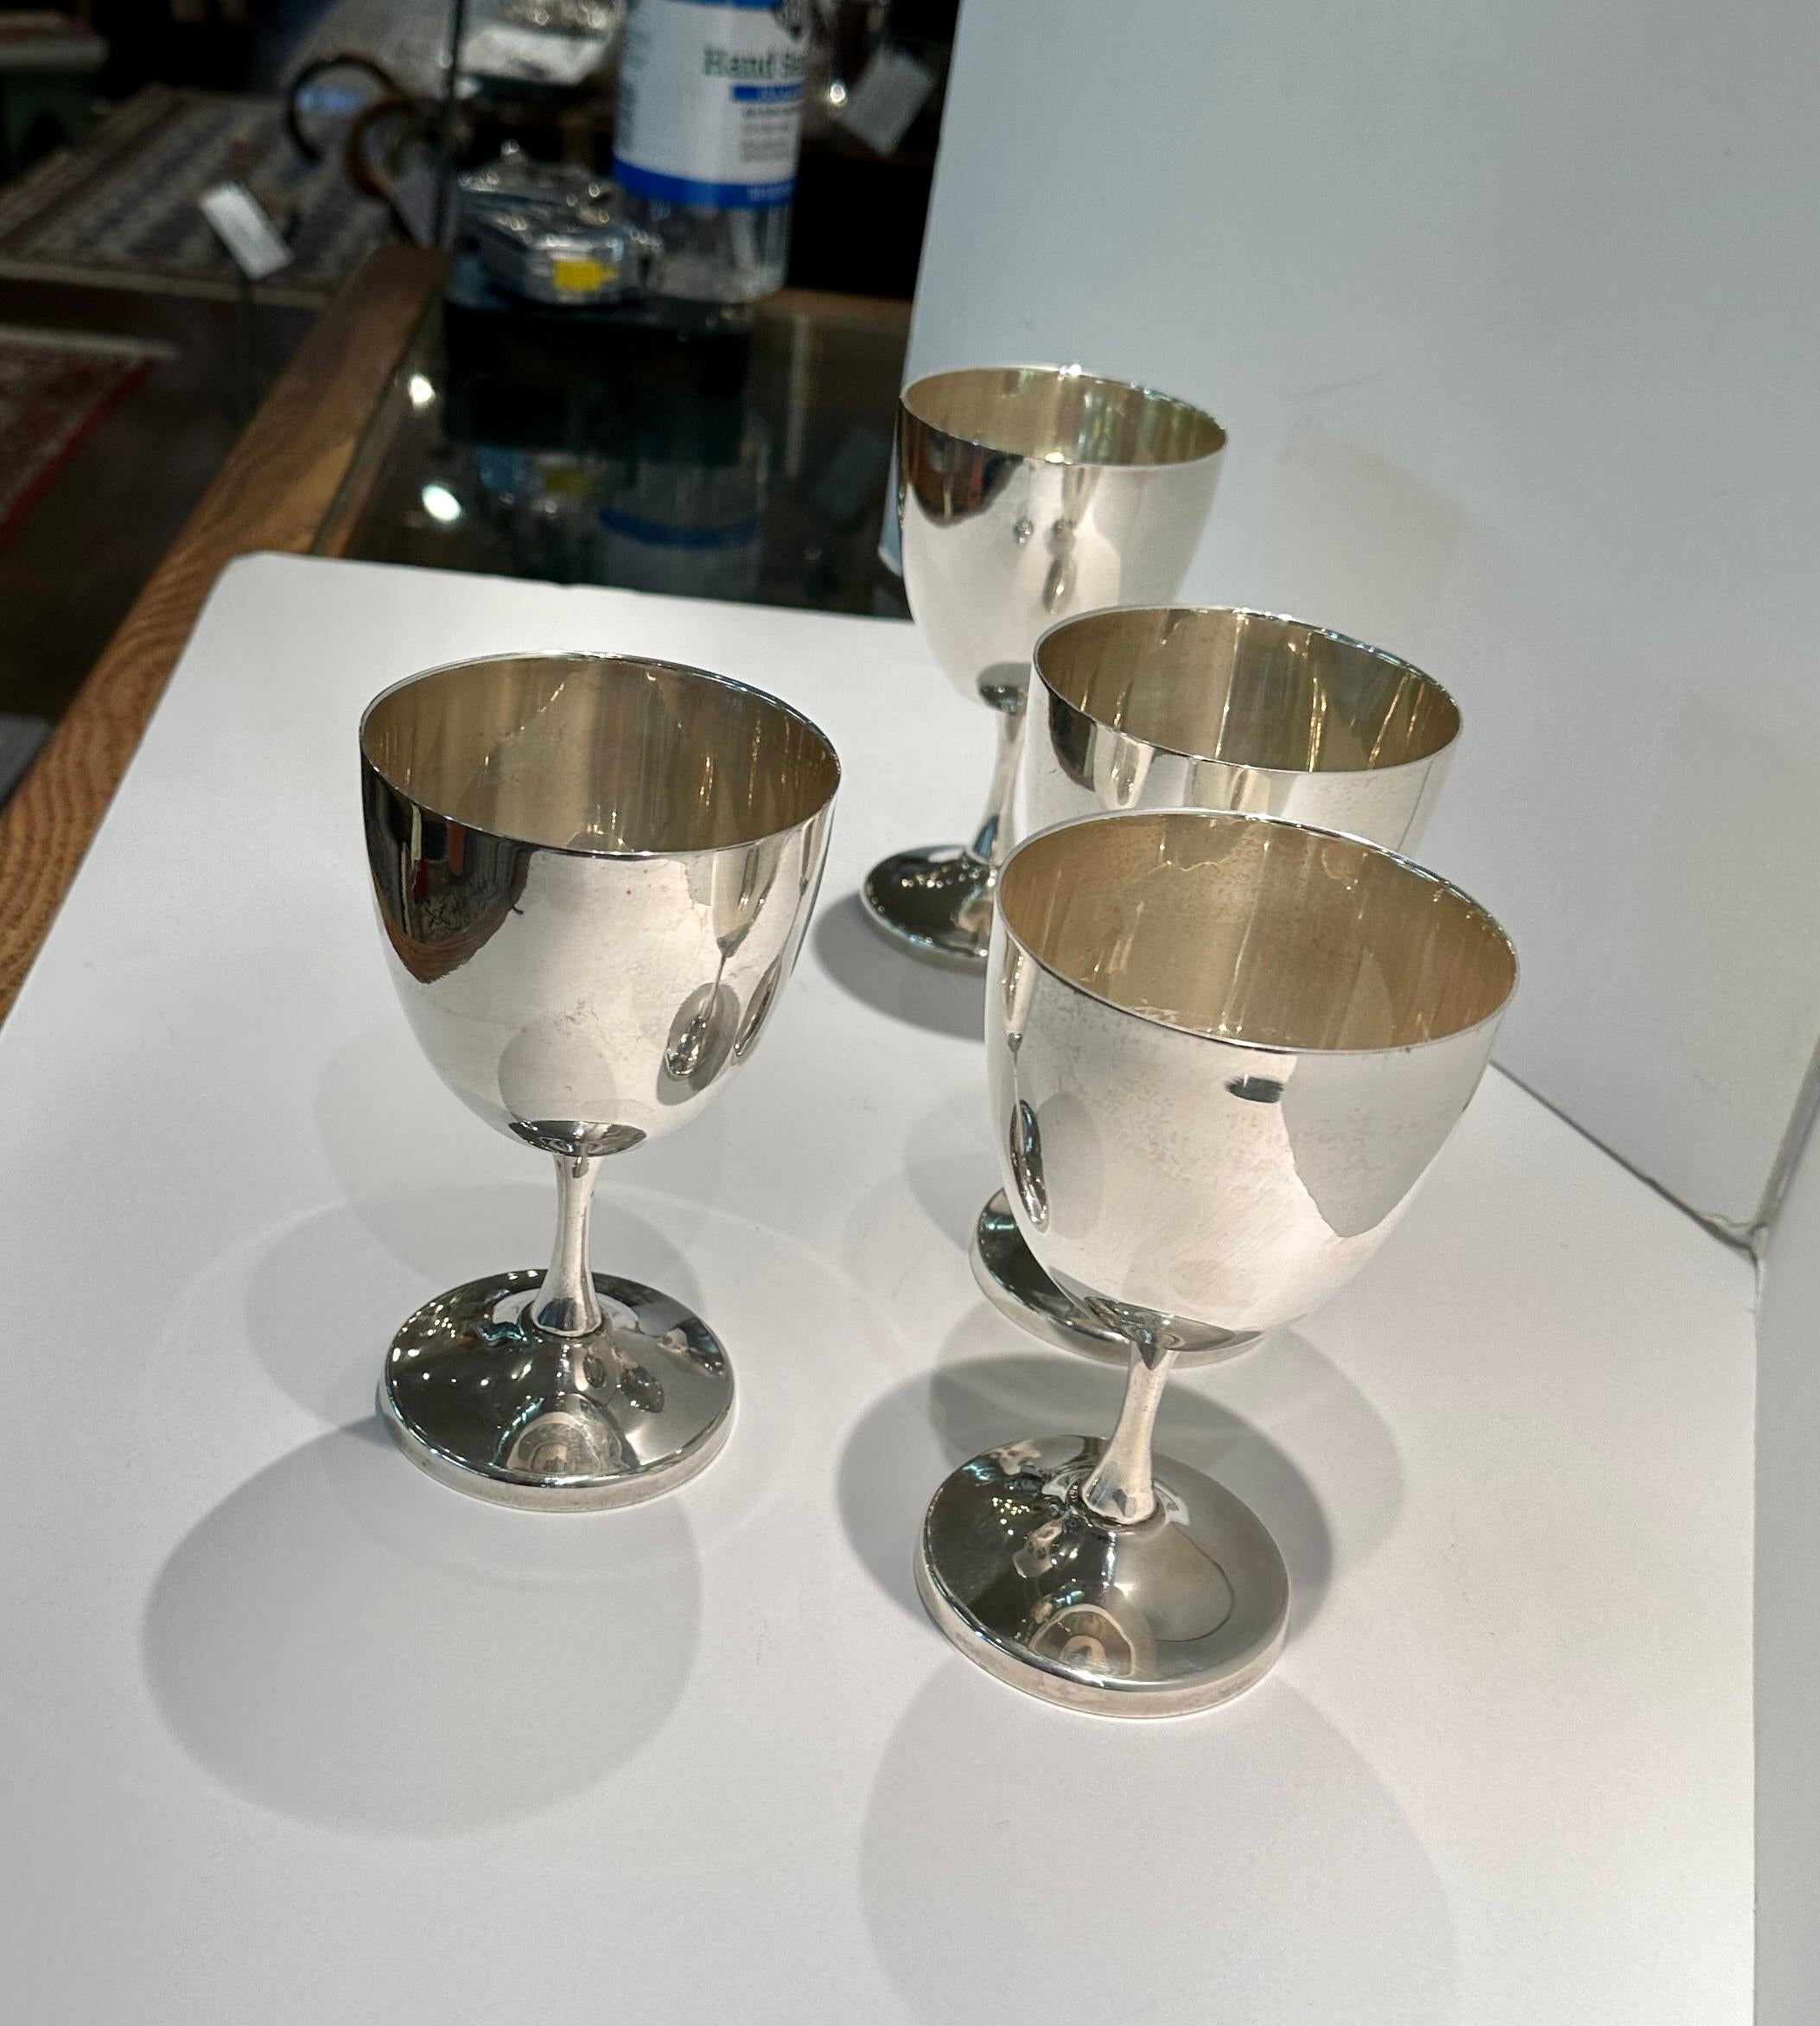 Set of 4 sterling silver wine goblets.
Beautifully proportioned, hand made by Taxco artisan, Mexico.  
Marked underside.  Excellent condition.